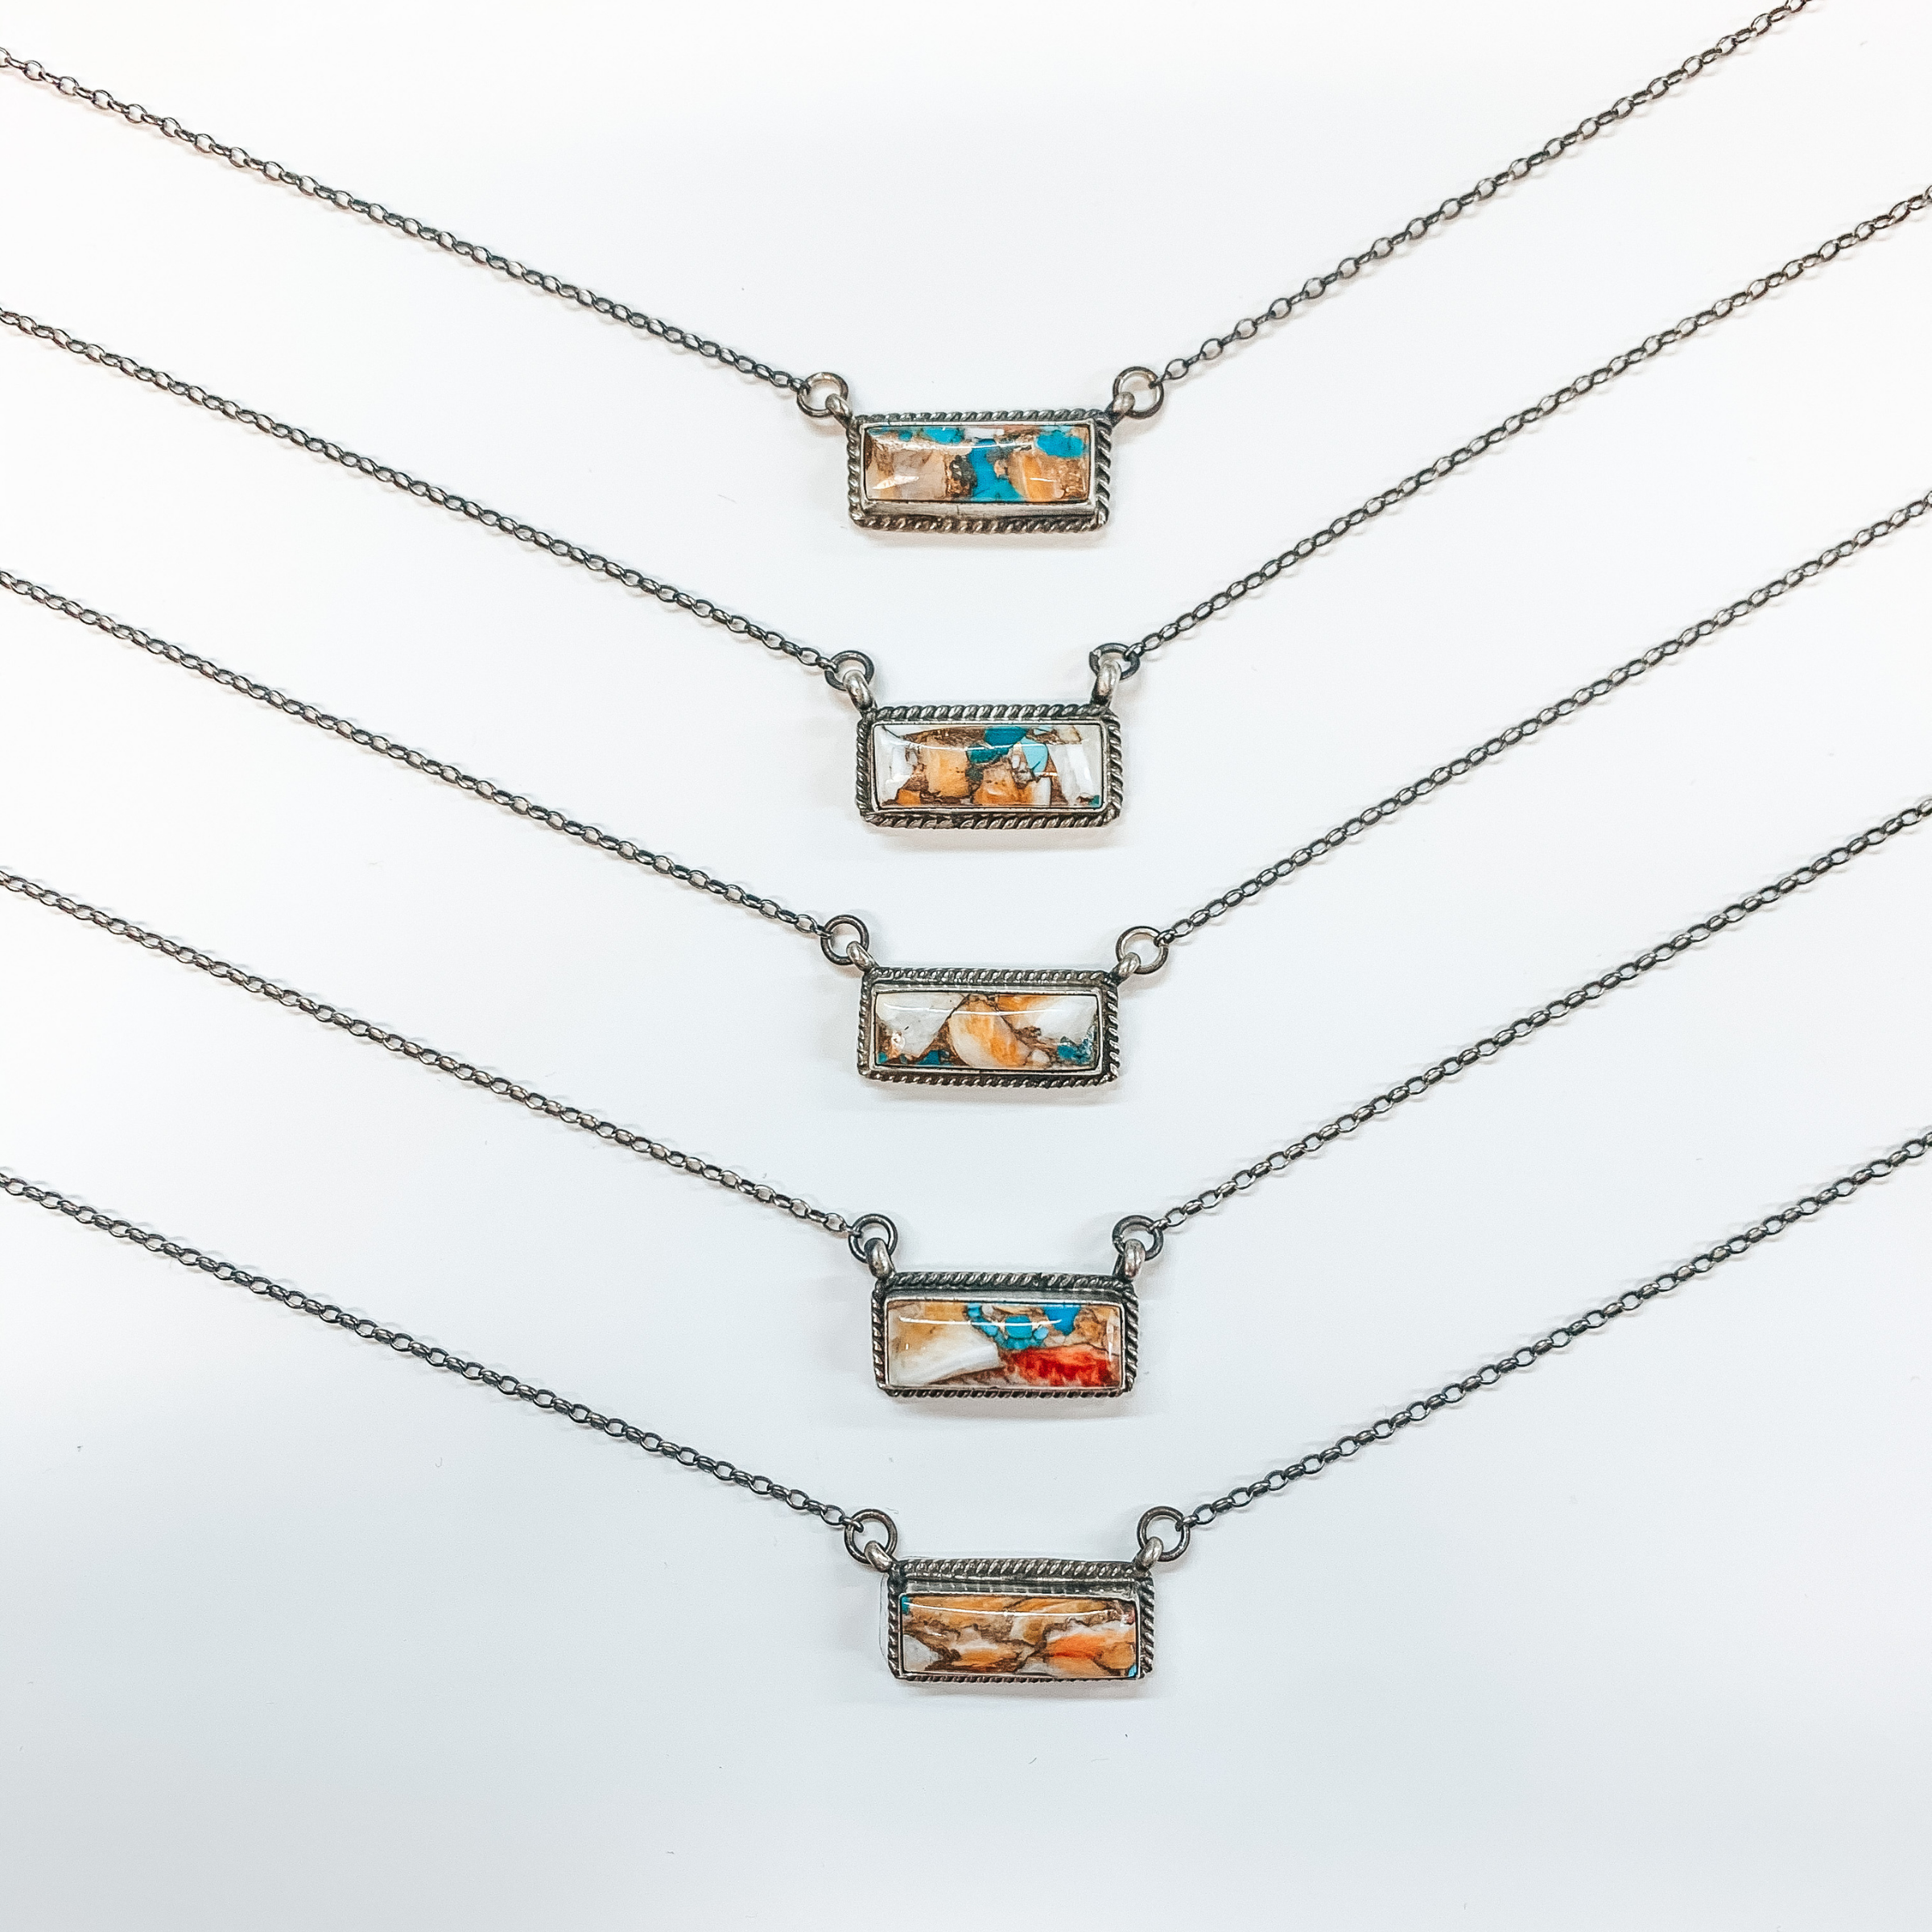 Various Artists | Navajo Handmade Sterling Silver Chain Necklace with Remix Spiny Turquoise Stone and Rope Detailing Bar - Giddy Up Glamour Boutique